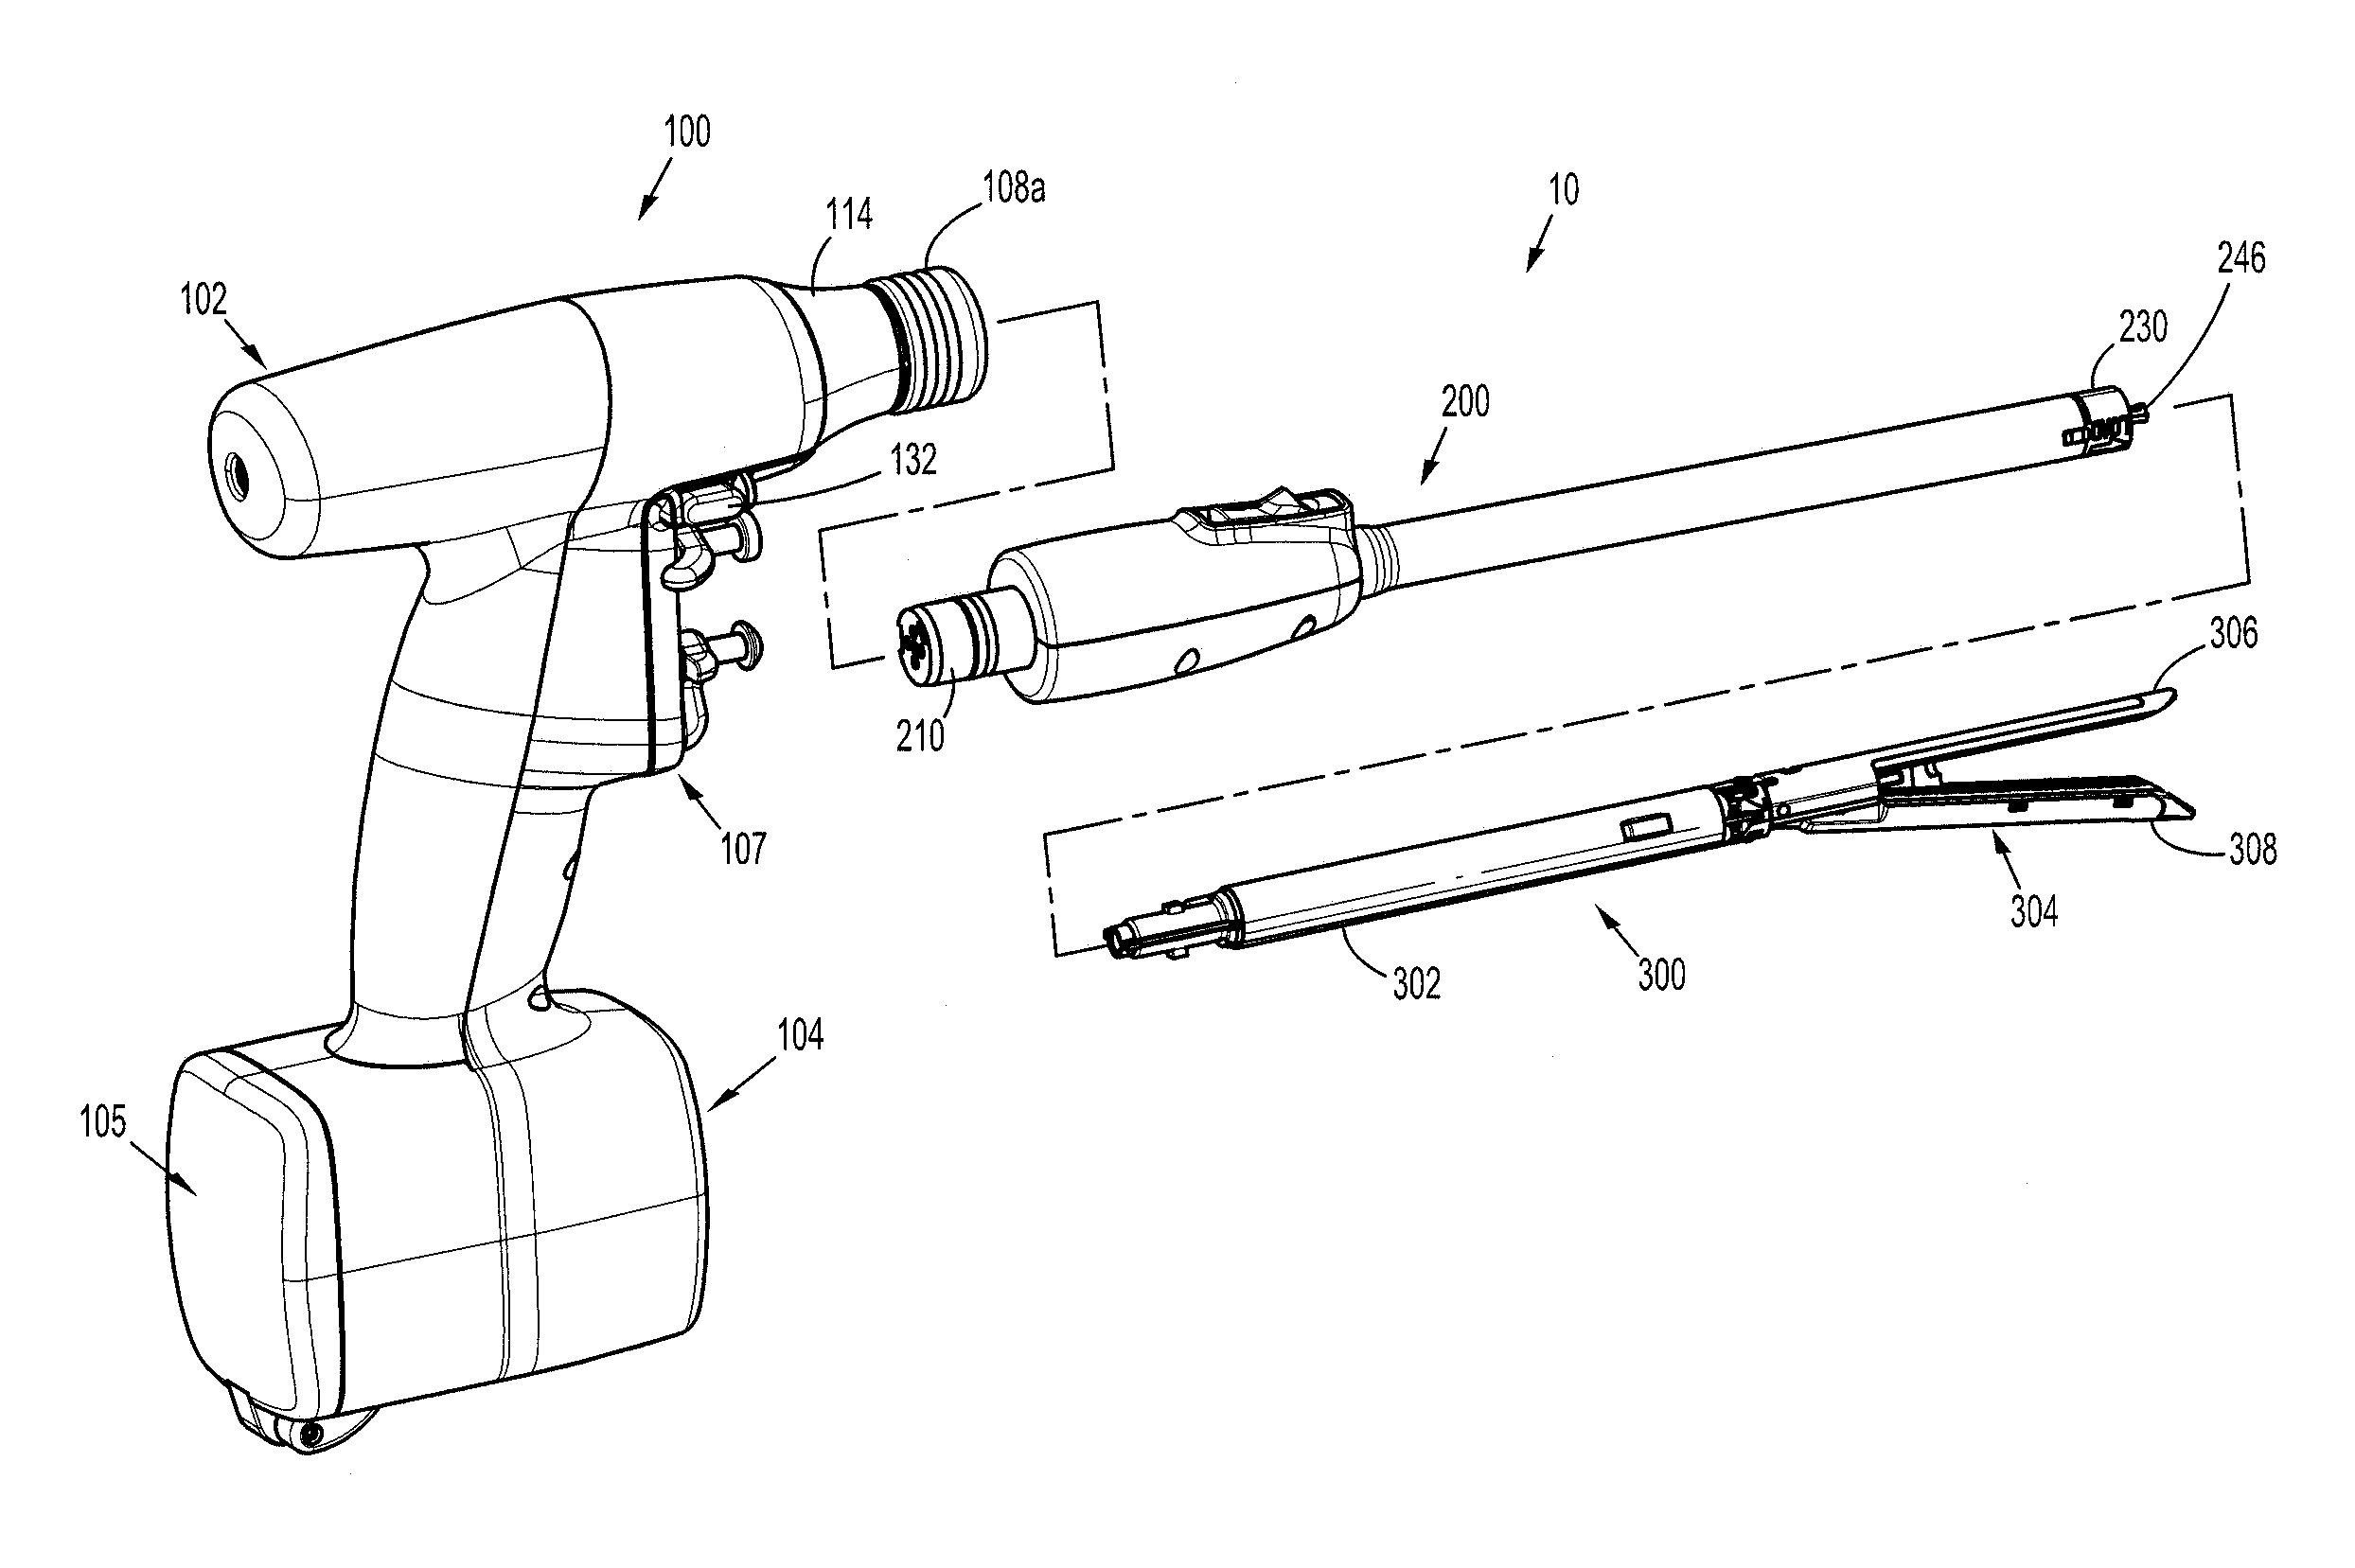 Surgical Instrument with Rapid Post Event Detection